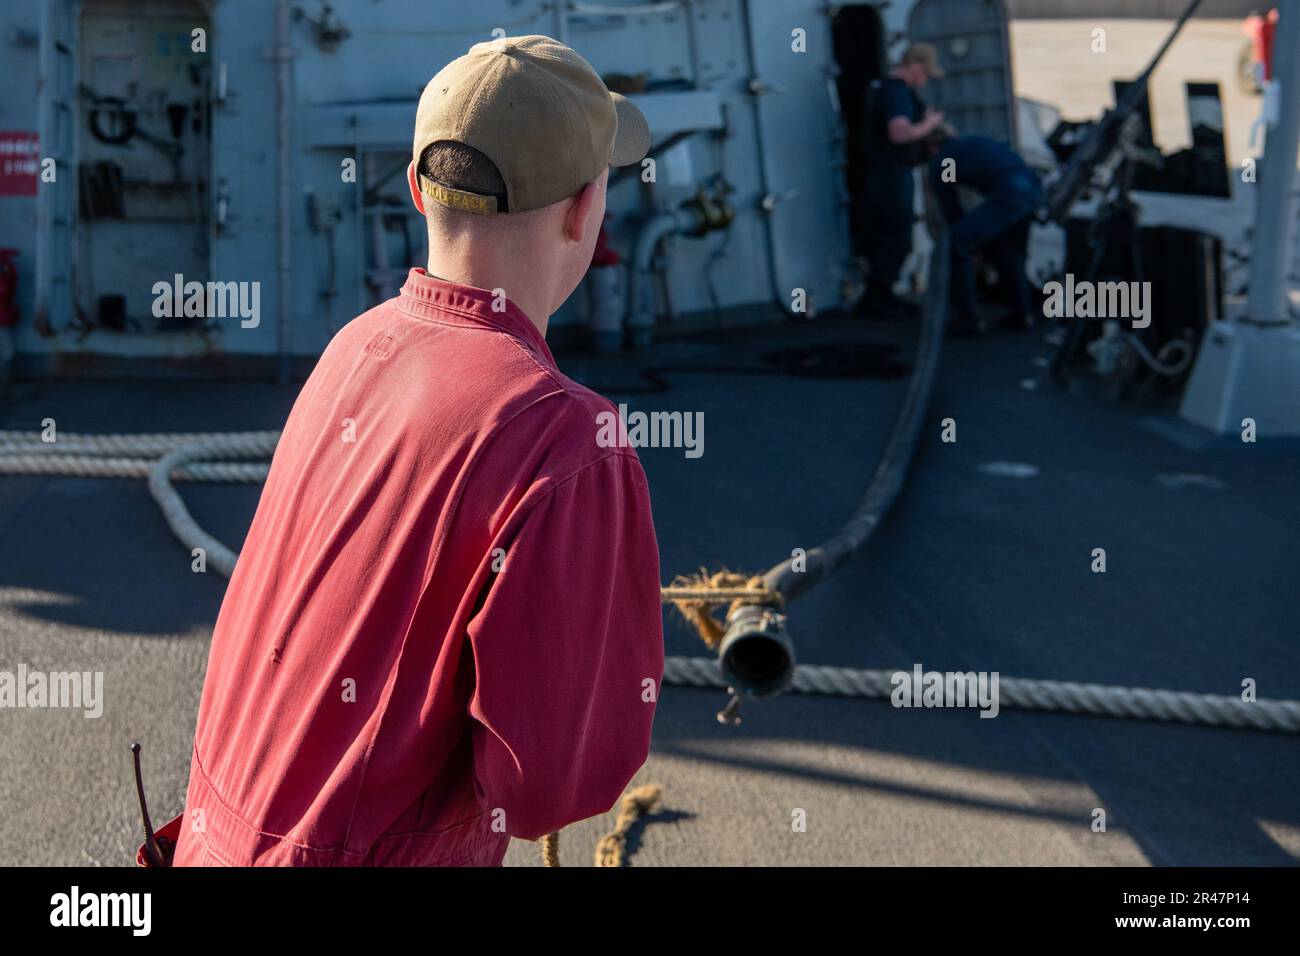 230323-N-MG537-1003 SAL ISLAND, Cabo Verde (March 23, 2023) Hull Technician Second Class Leonard Johnson pulls tubing aboard the Arleigh Burke-class guided missile destroyer USS Bulkeley (DDG 84) in preparation to leave Sal Island, Cabo Verde, March 23, 2023. Bulkeley routinely operates in the U.S. Naval Forces Europe and Africa area of operations, employed by U.S. Sixth Fleet to defend U.S., Allied and Partner interests. Stock Photo